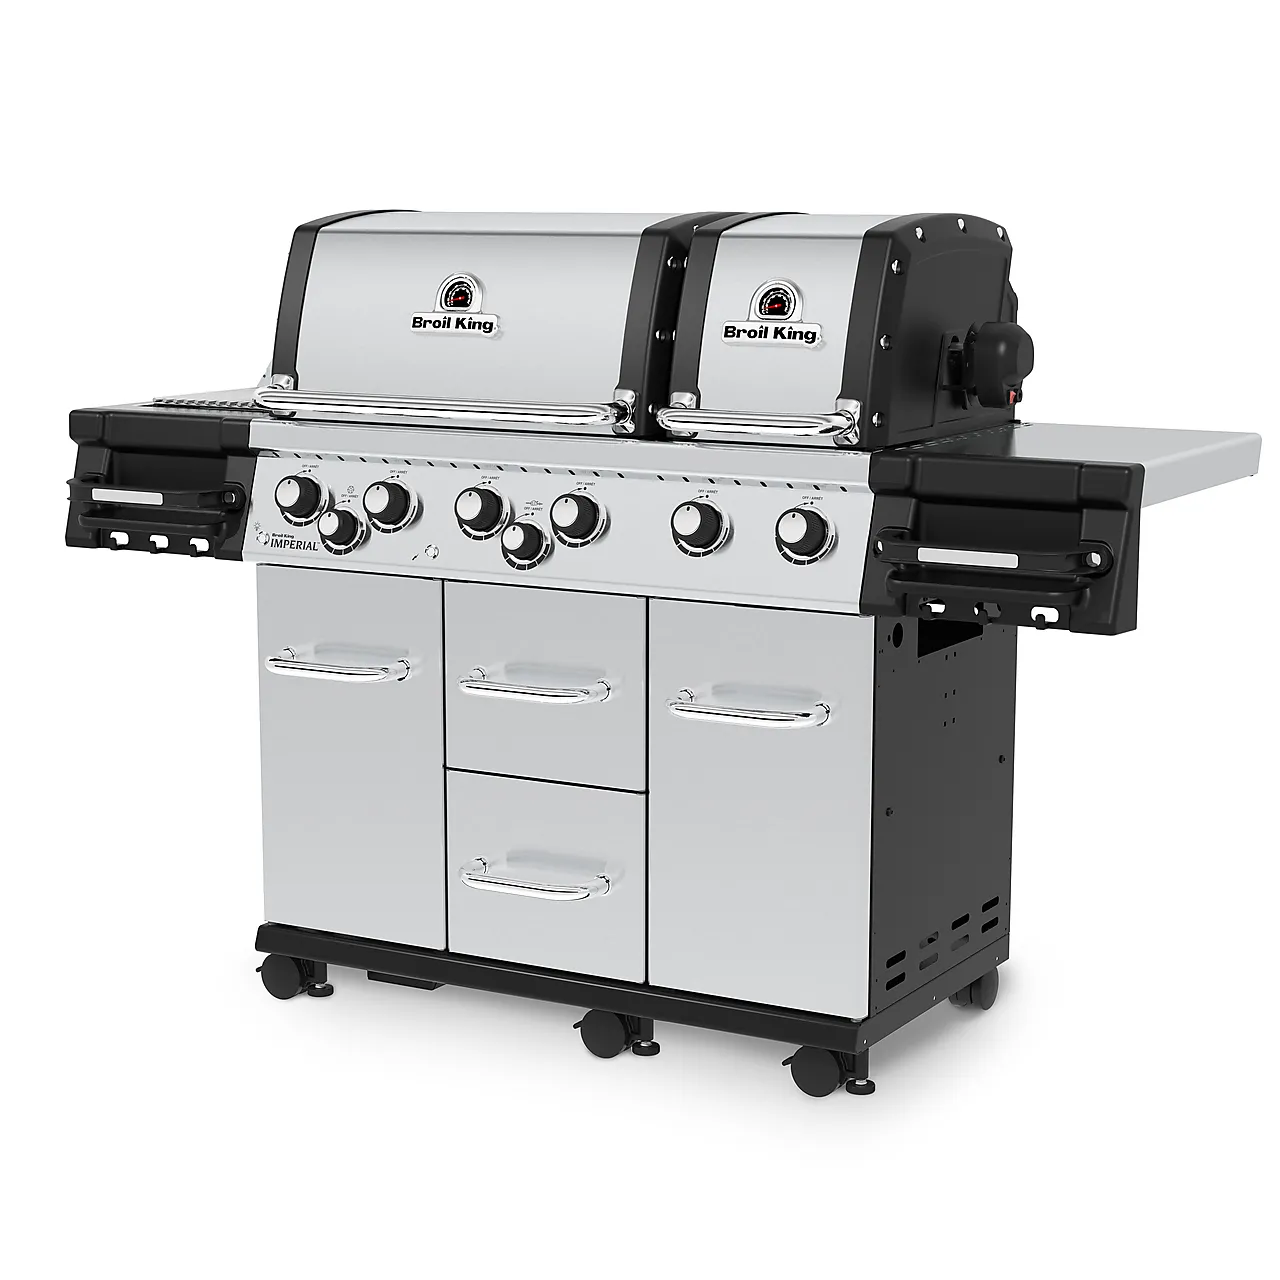 Gassgrill Imperial S 690 IR null - null - 3 - Miniatyr